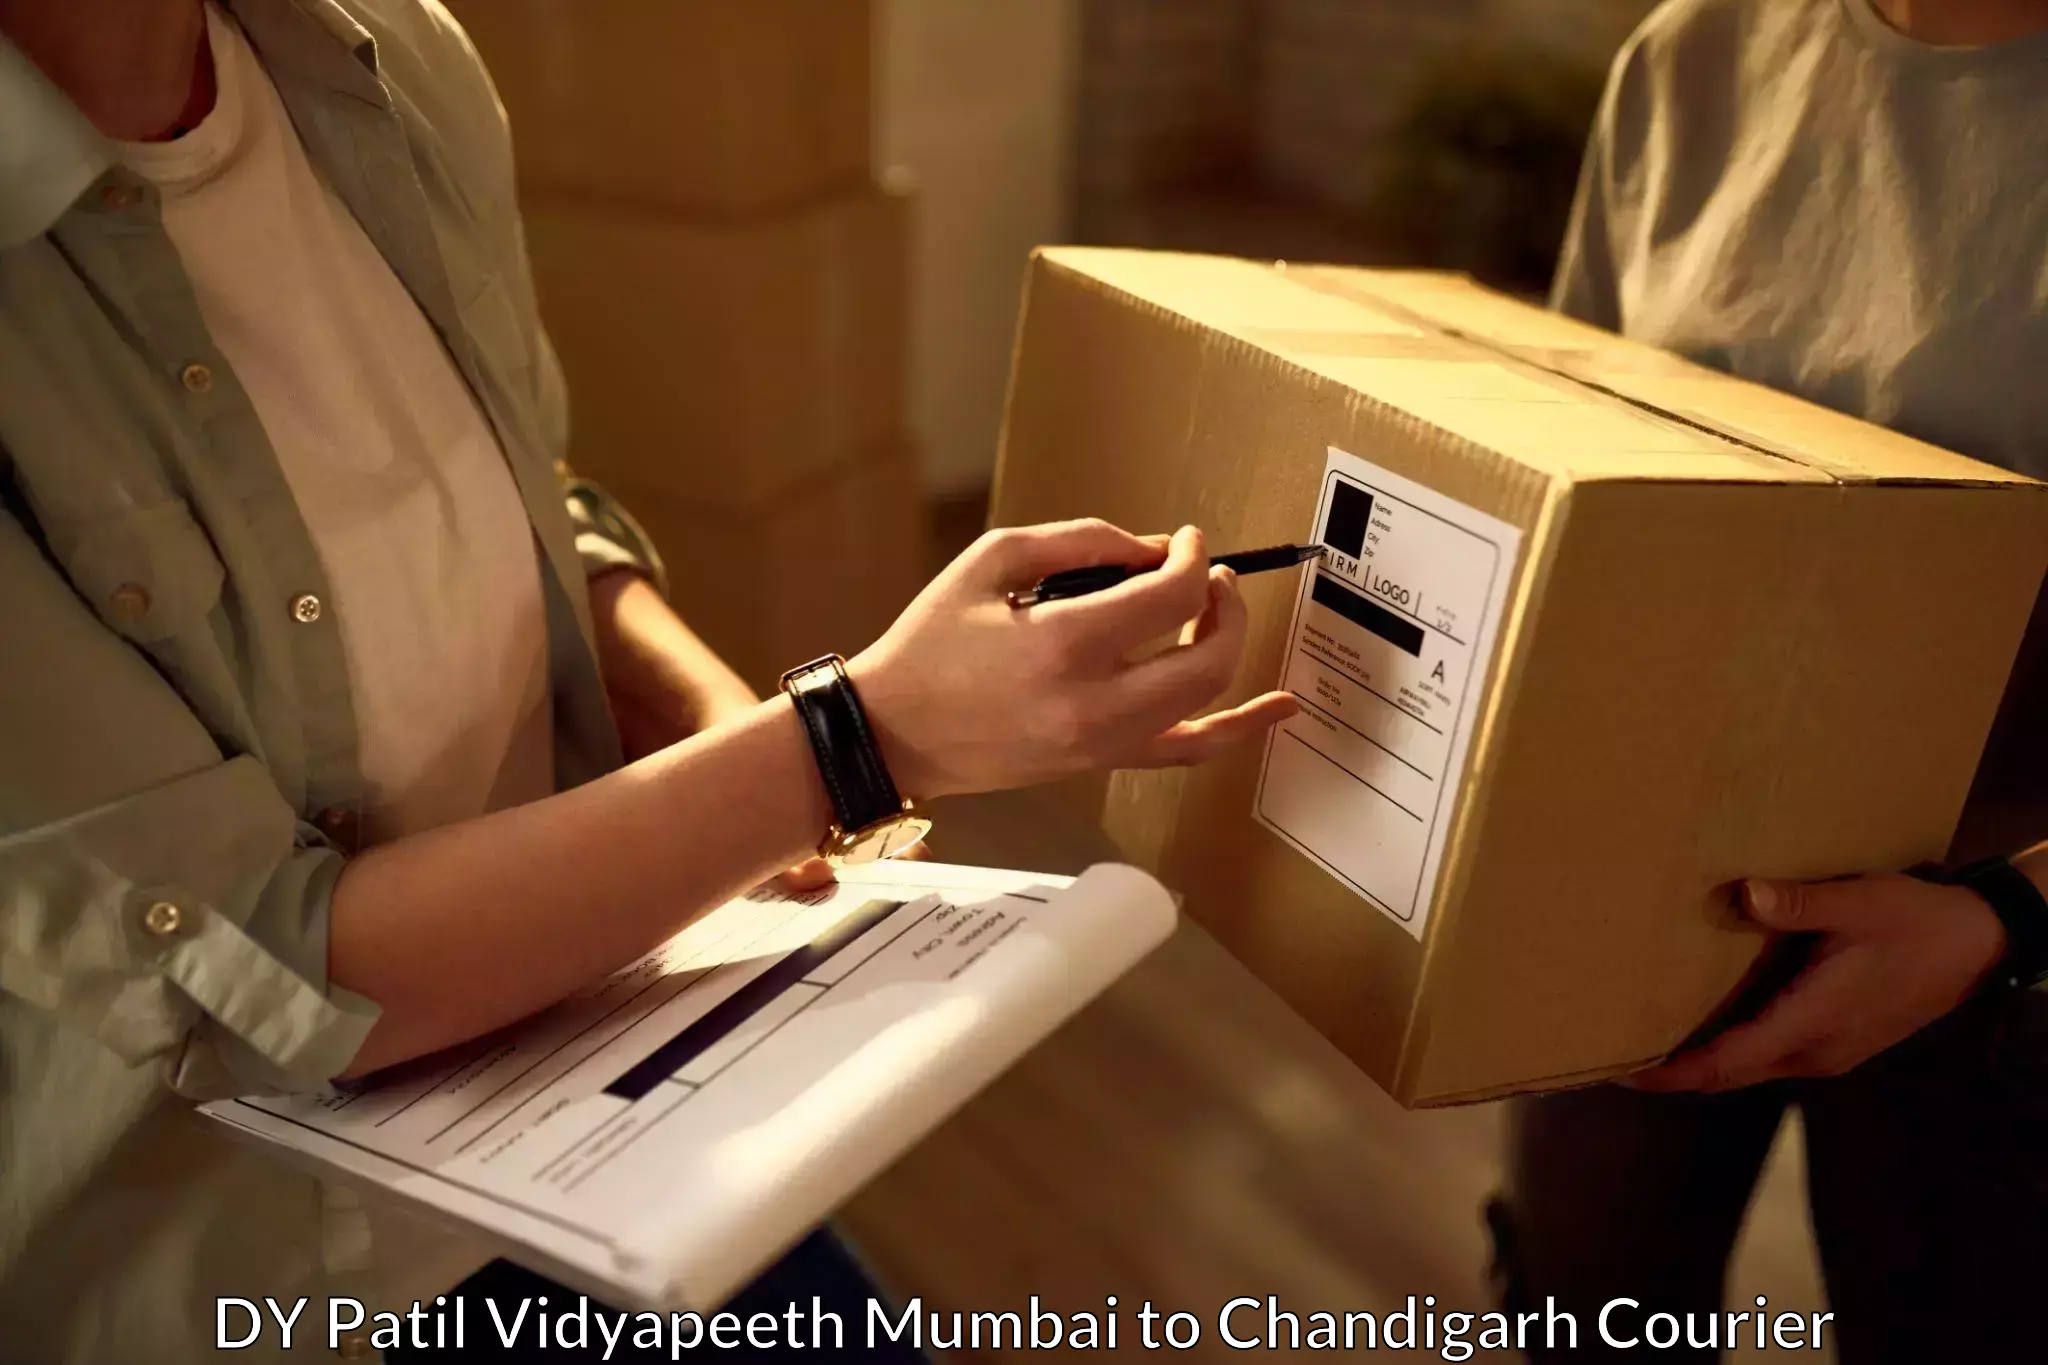 Specialized shipment handling in DY Patil Vidyapeeth Mumbai to Chandigarh